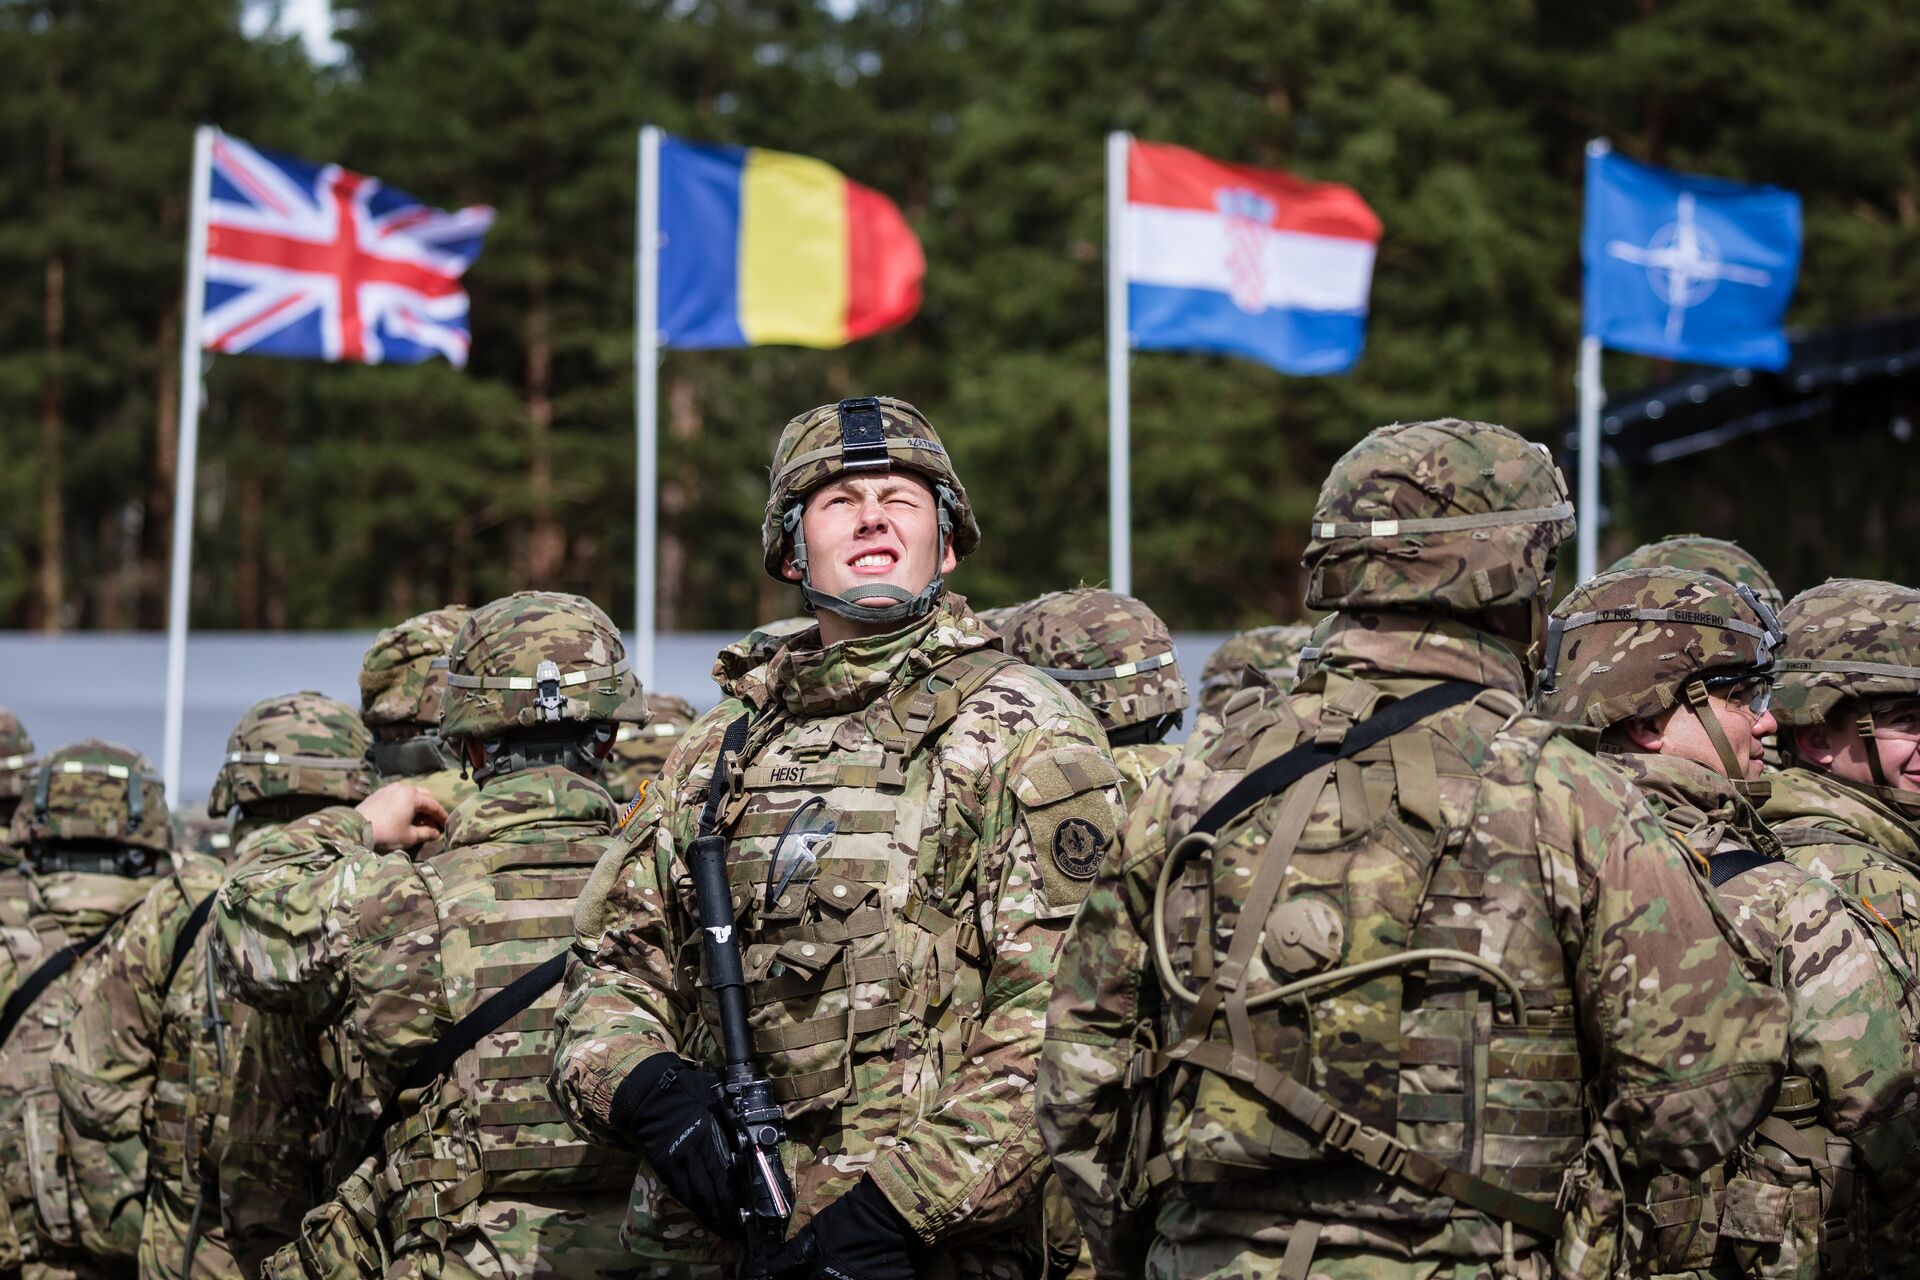 US soldiers are pictured prior the beginning of the official welcoming ceremony of NATO troops in Orzysz, Poland, on April 13, 2017. - Sputnik International, 1920, 15.02.2022